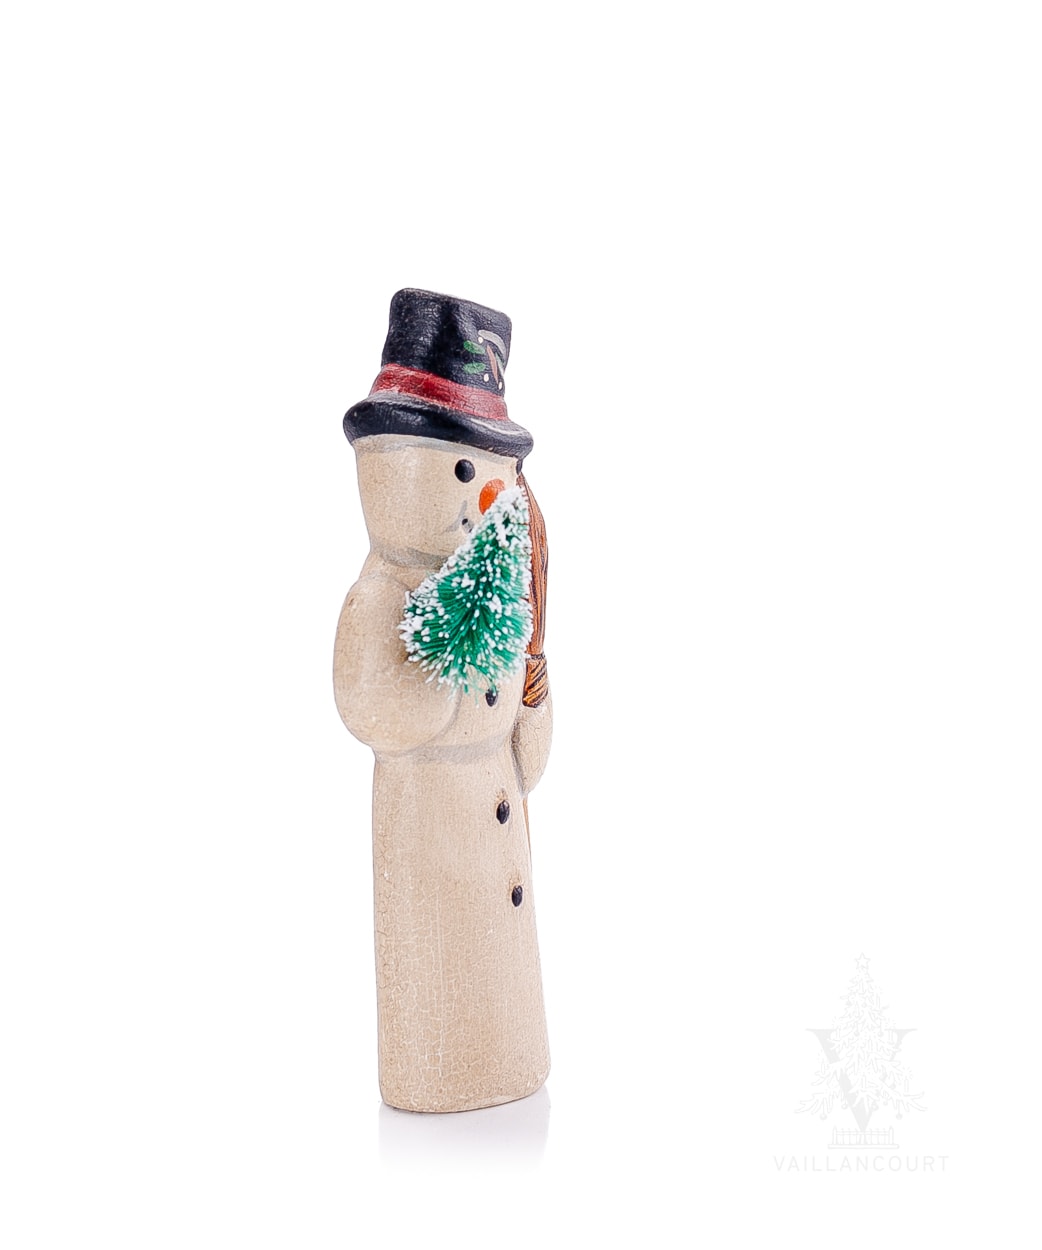 Snowman with Tree and Broom from Vaillancourt